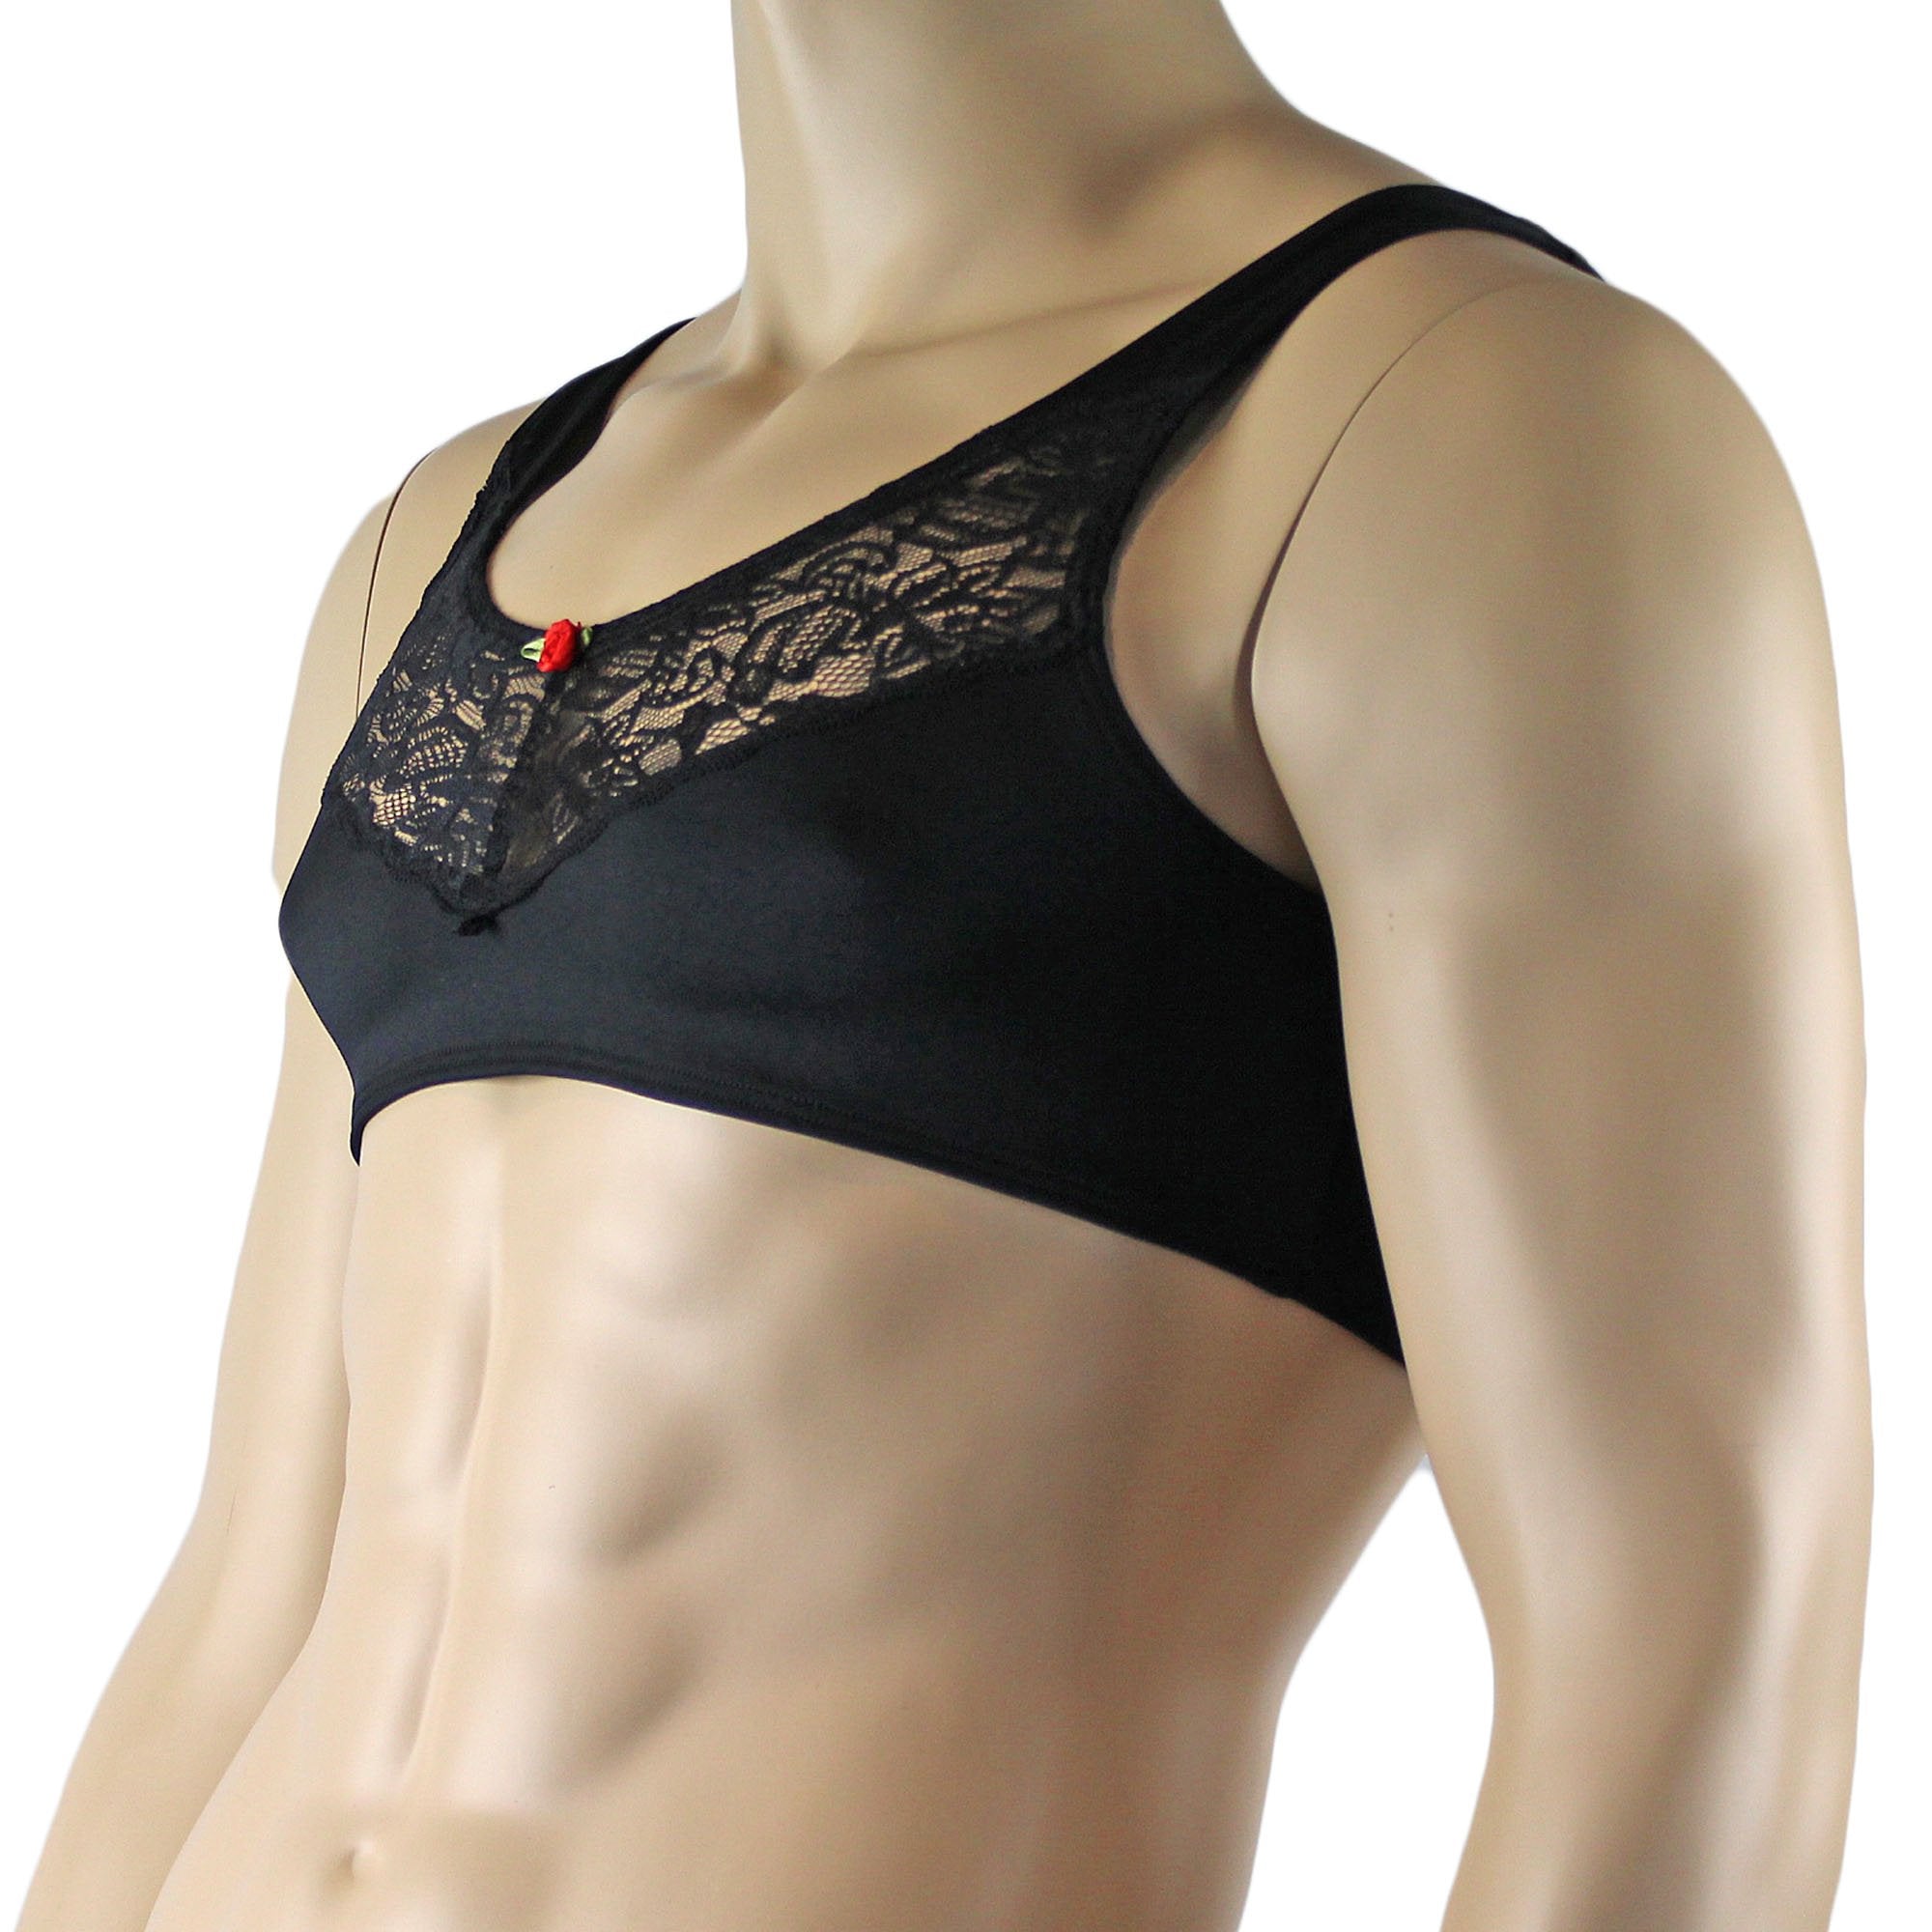 Male Penny Lingerie Bra Top with V Lace Front Black